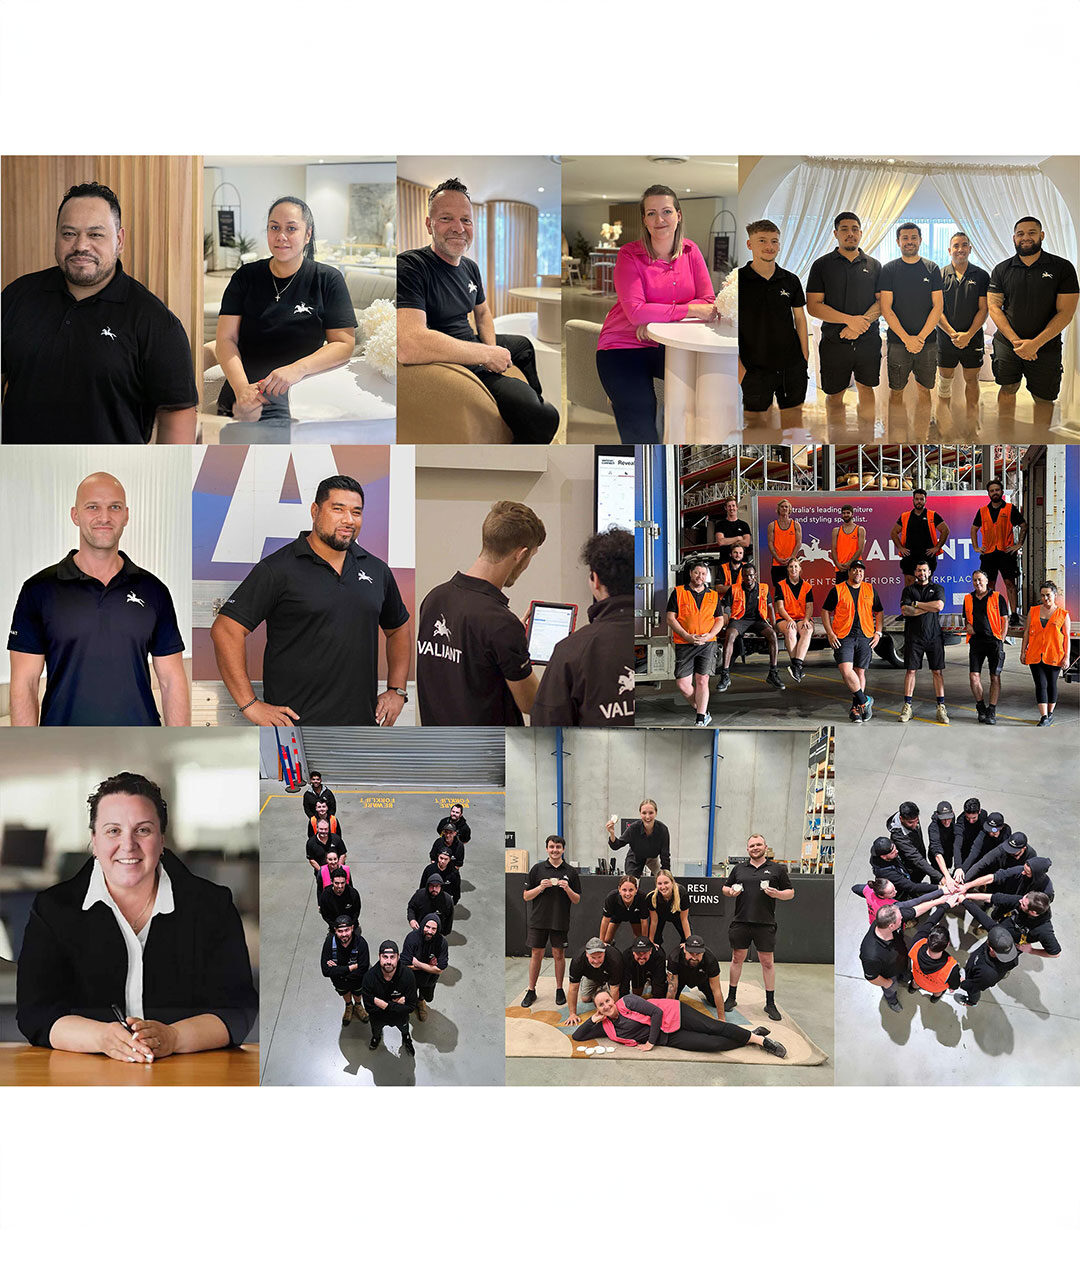 Ops-national-team-qld-nsw-vic